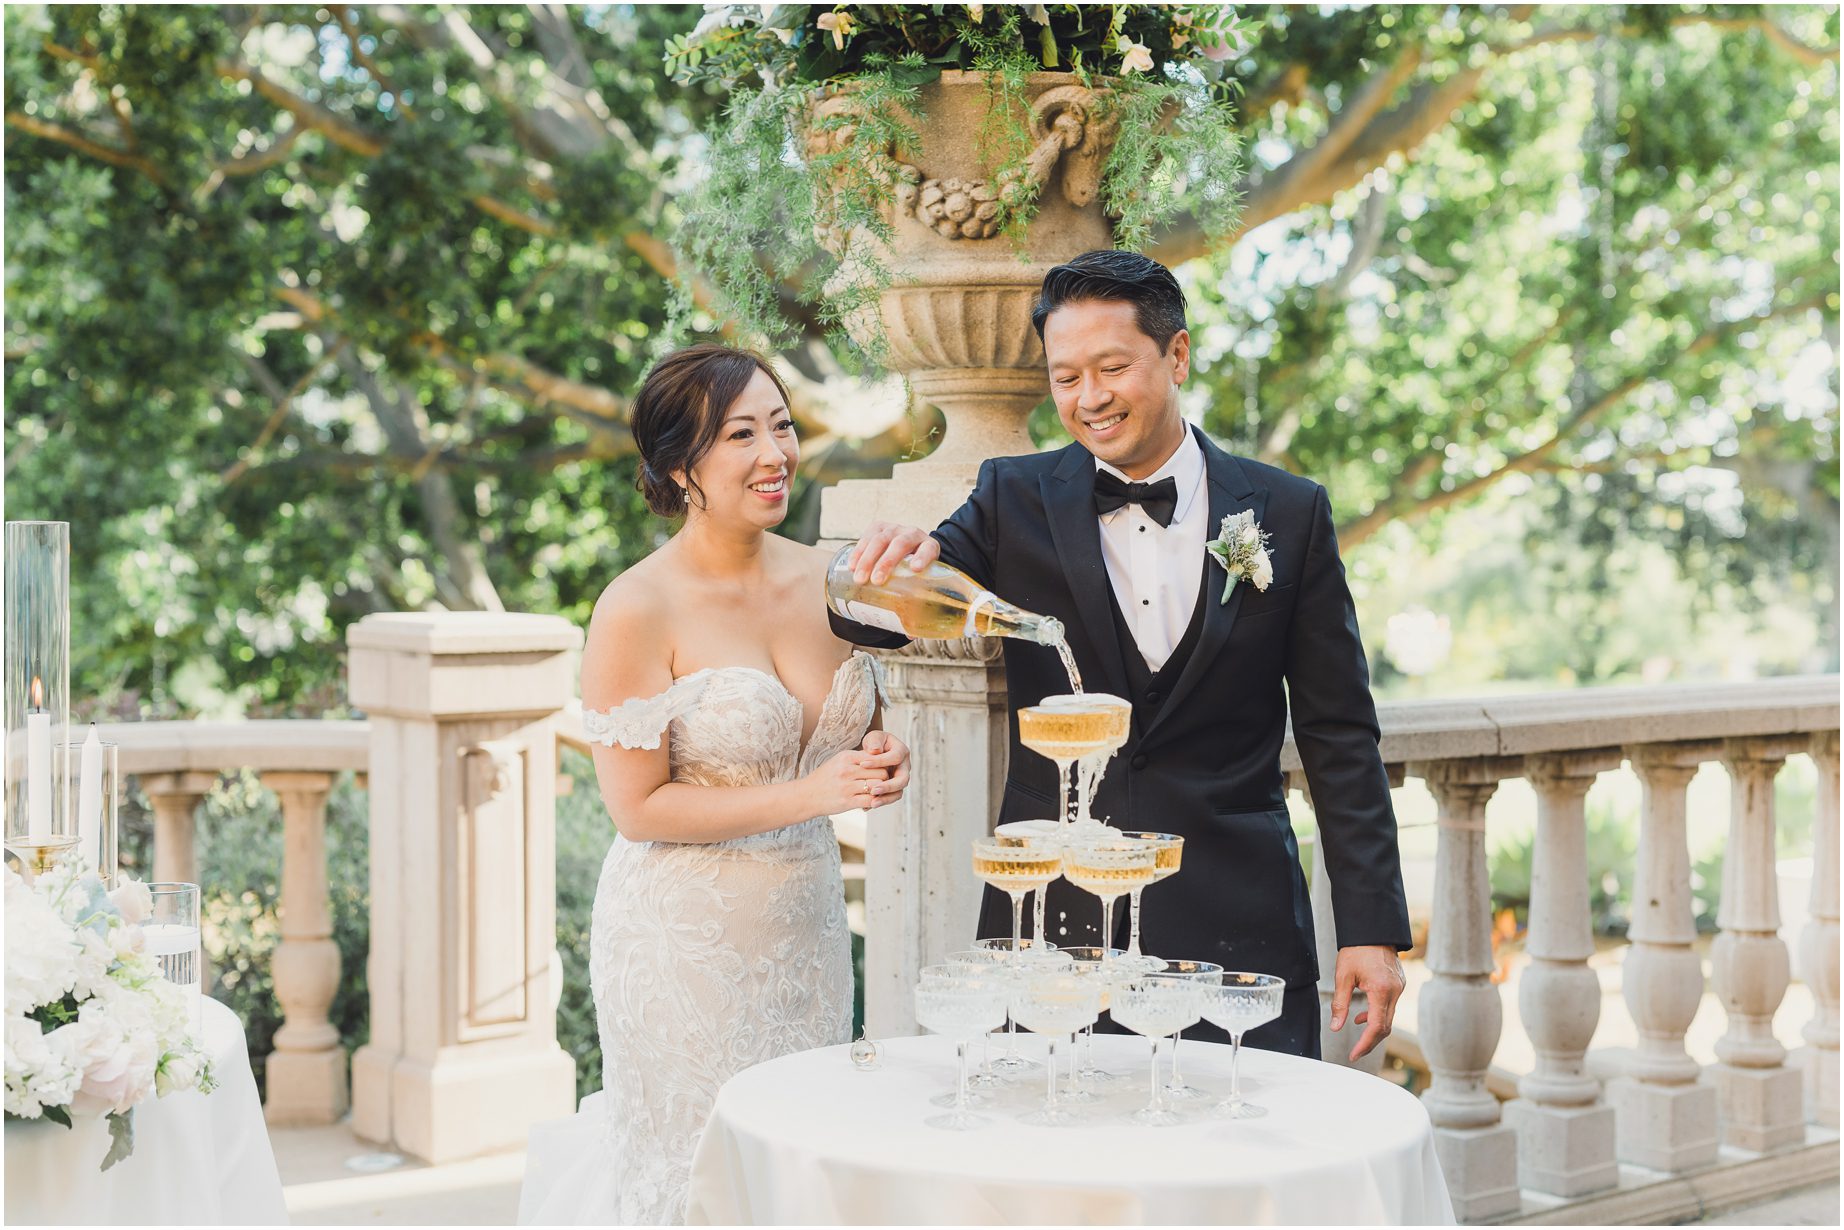 A bride and groom pose in front of their dreamy wedding details on their wedding day at Villa del sol D'oro. Featuring a champagne tower and flowers